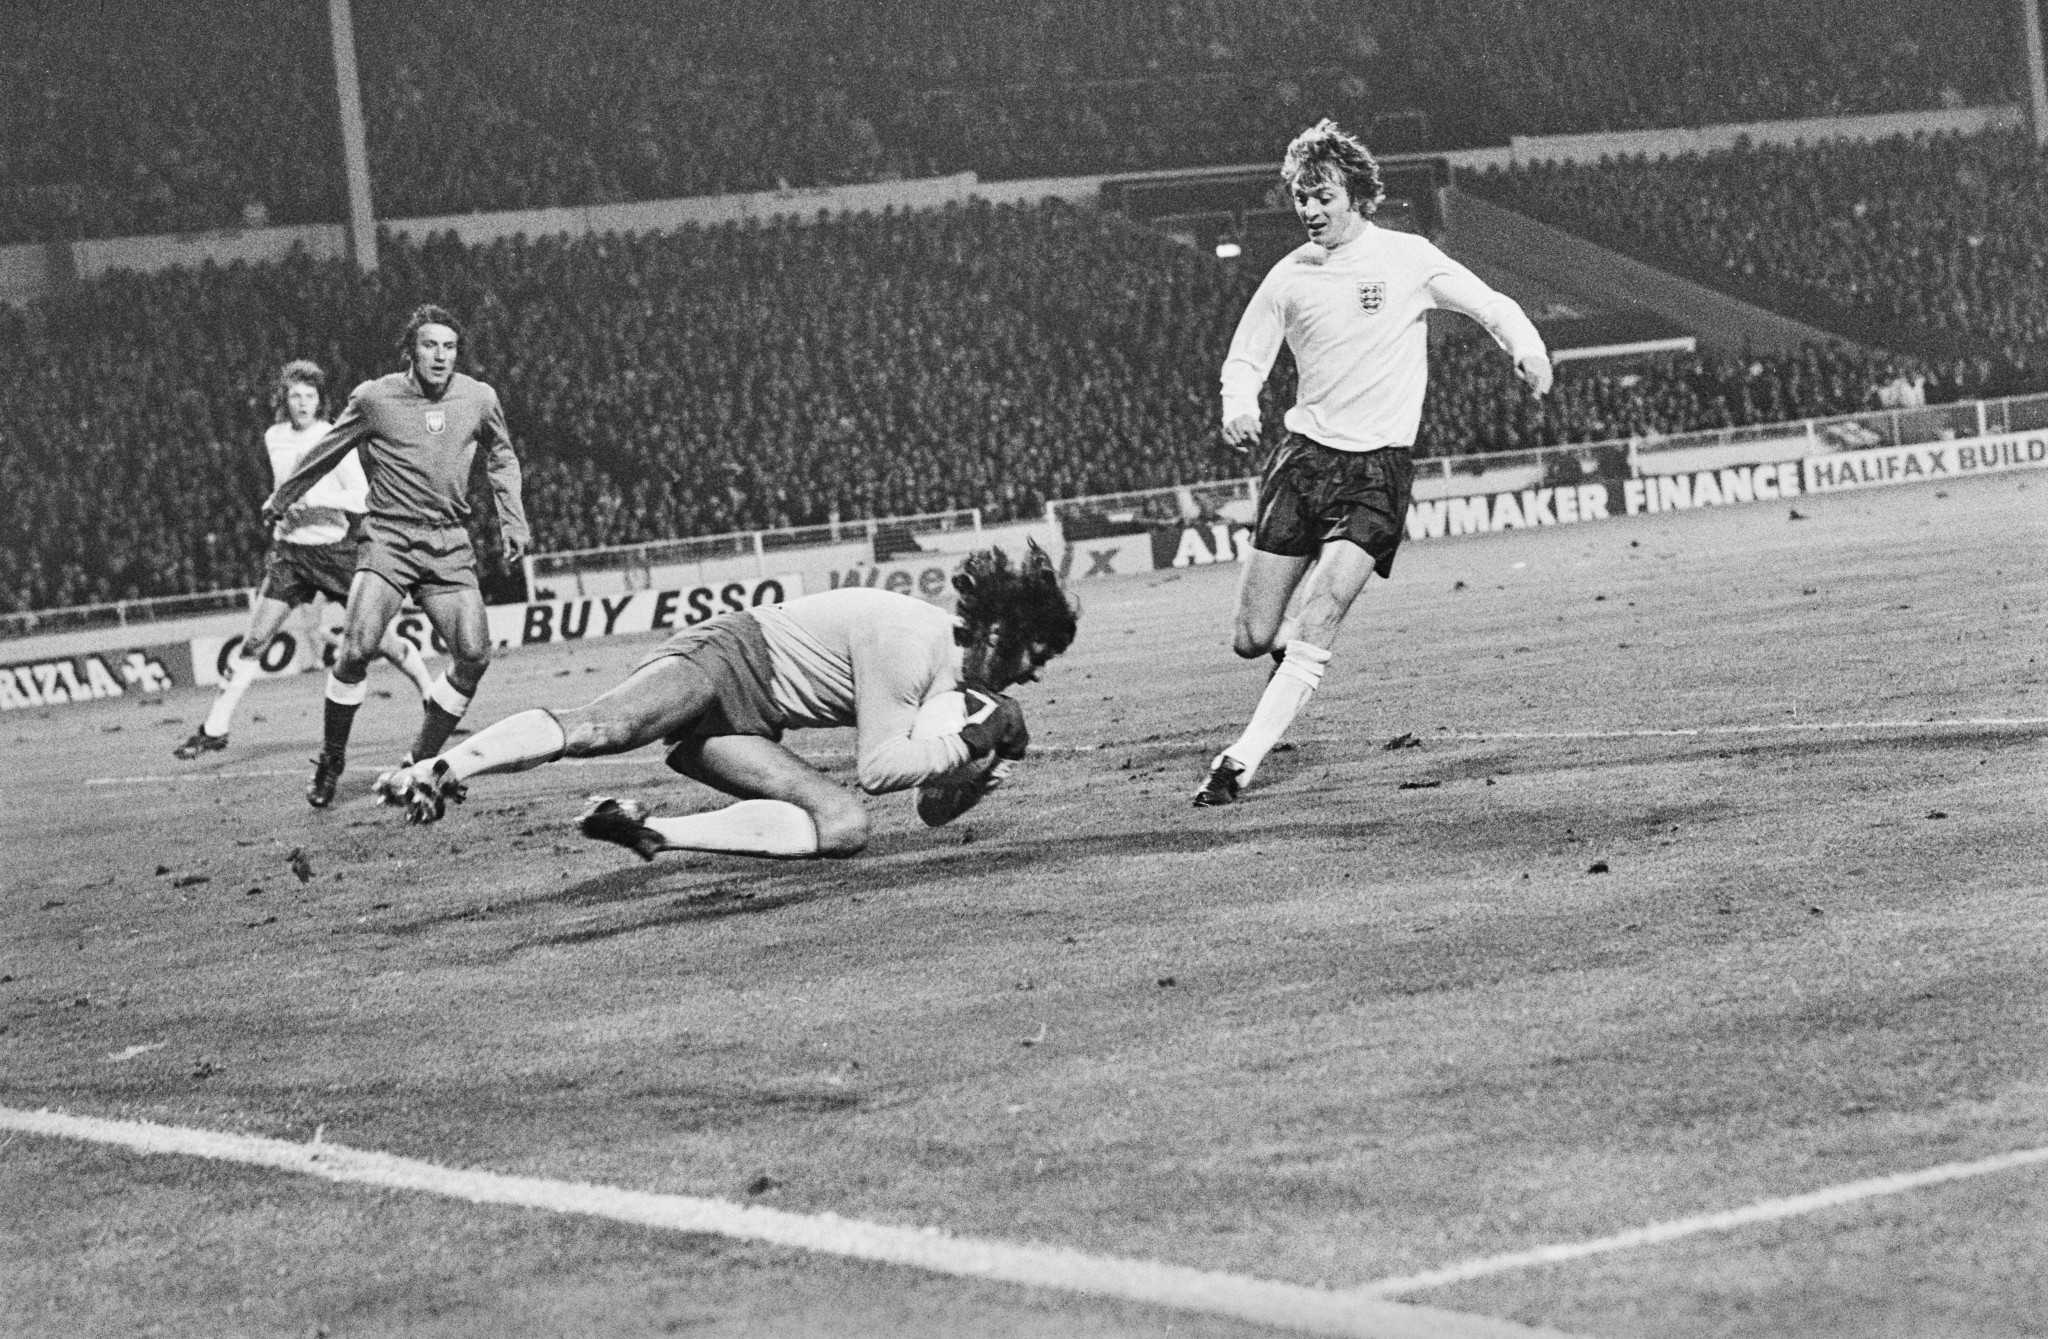 Poland's keeper Jan Tomaszewski played the game of his life against England at Wembley Stadium to help them qualify for the 1974 FIFA World Cup ©Getty Images